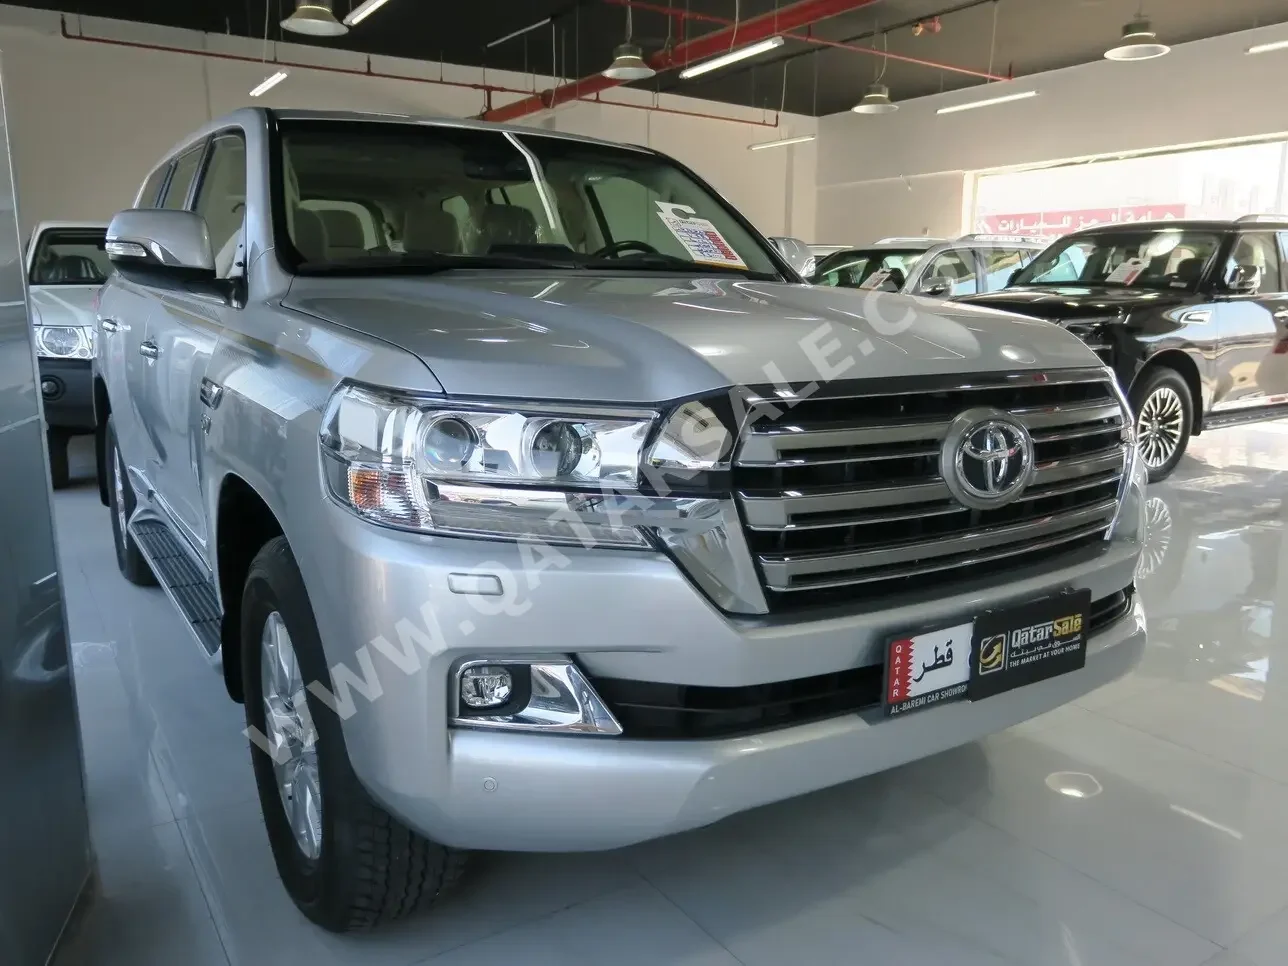 Toyota  Land Cruiser  VXR  2021  Automatic  0 Km  8 Cylinder  Four Wheel Drive (4WD)  SUV  Silver  With Warranty